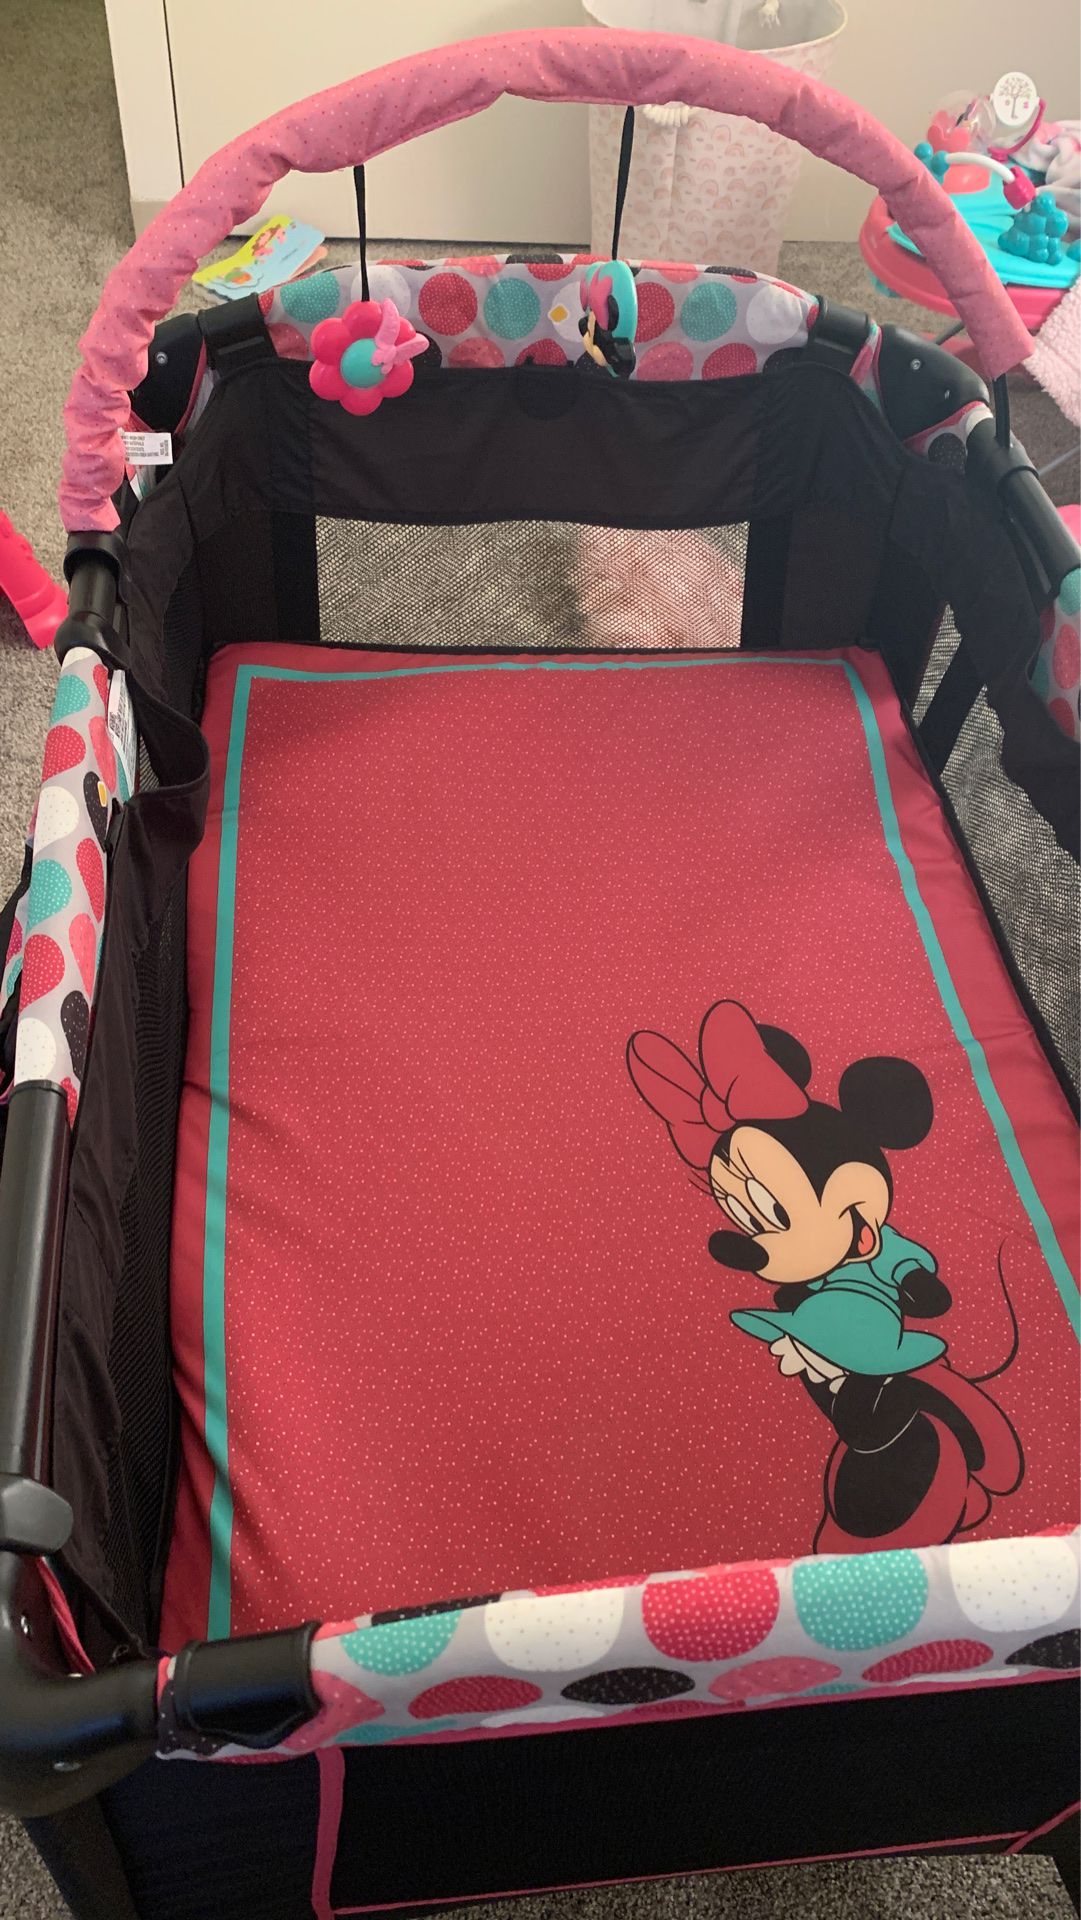 Minnie Mouse pack and play